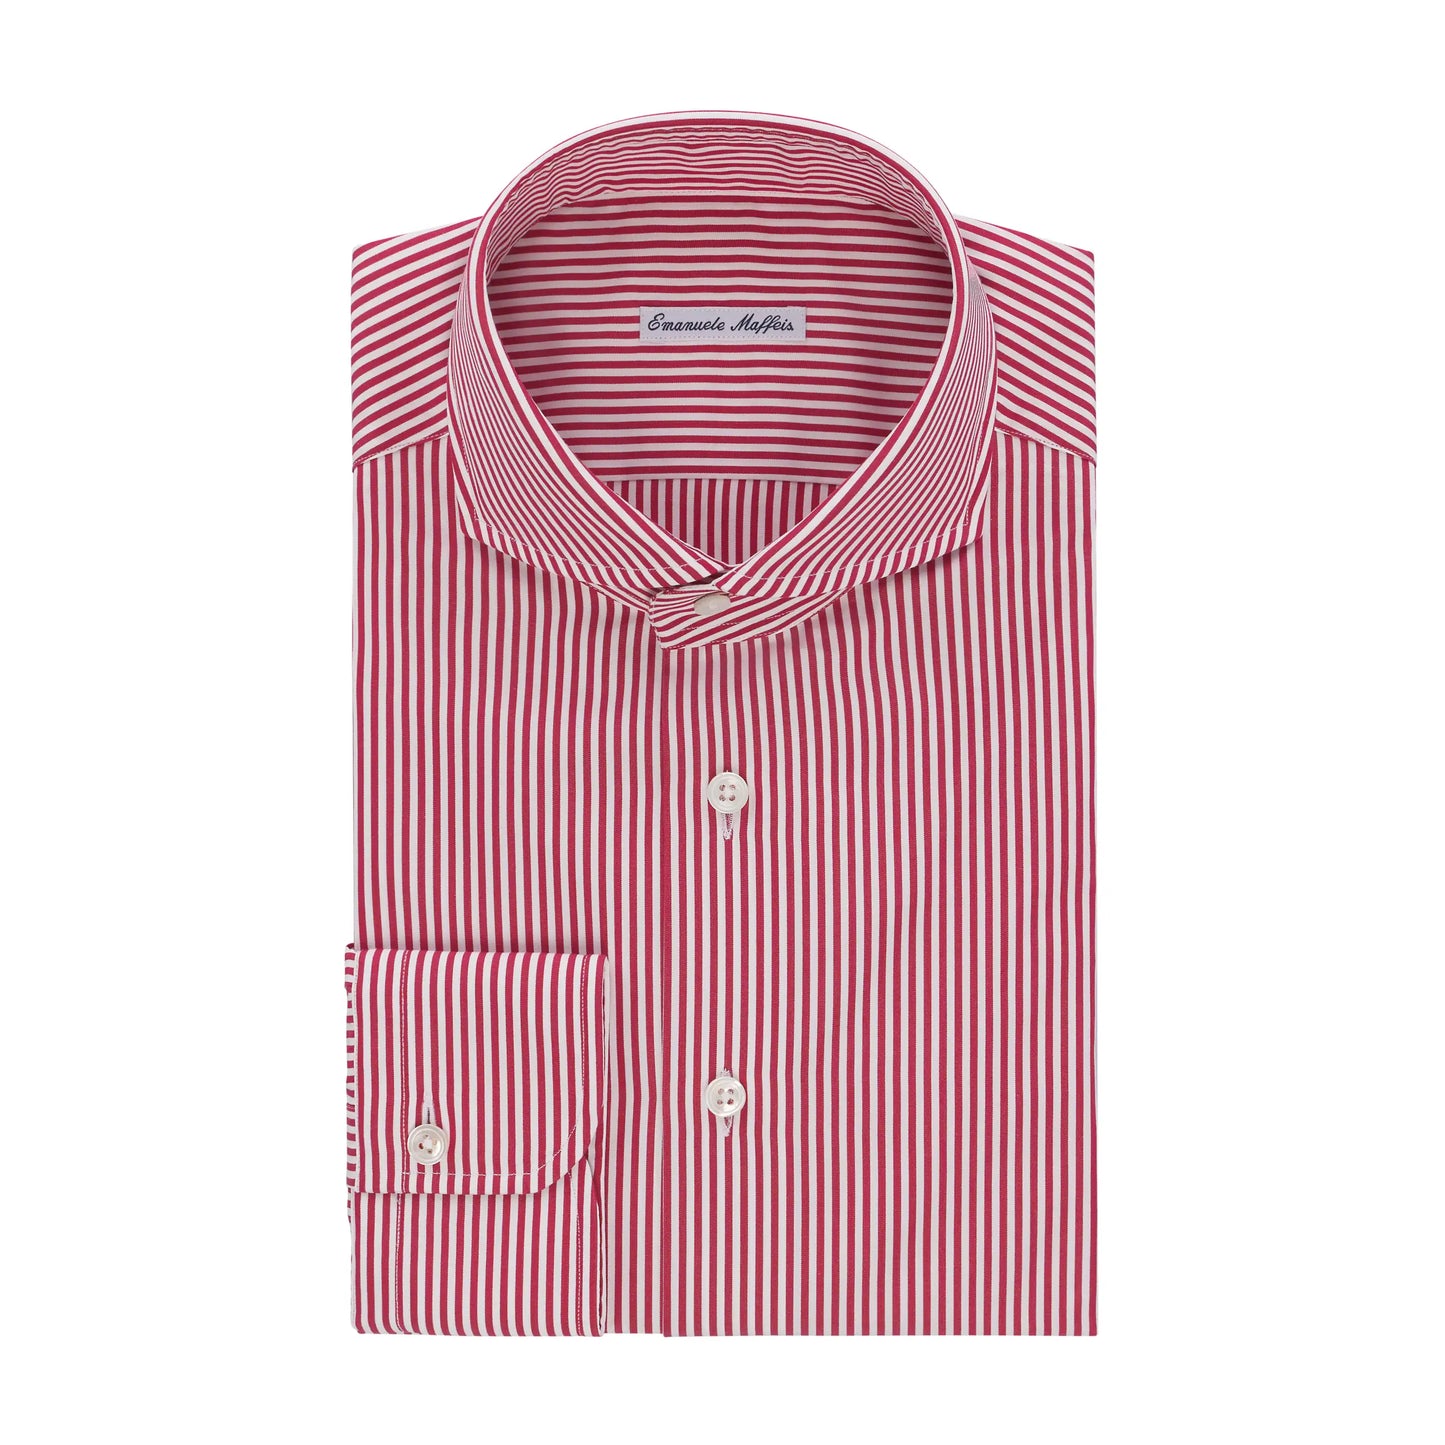 Striped Cotton Shirt in Red and White